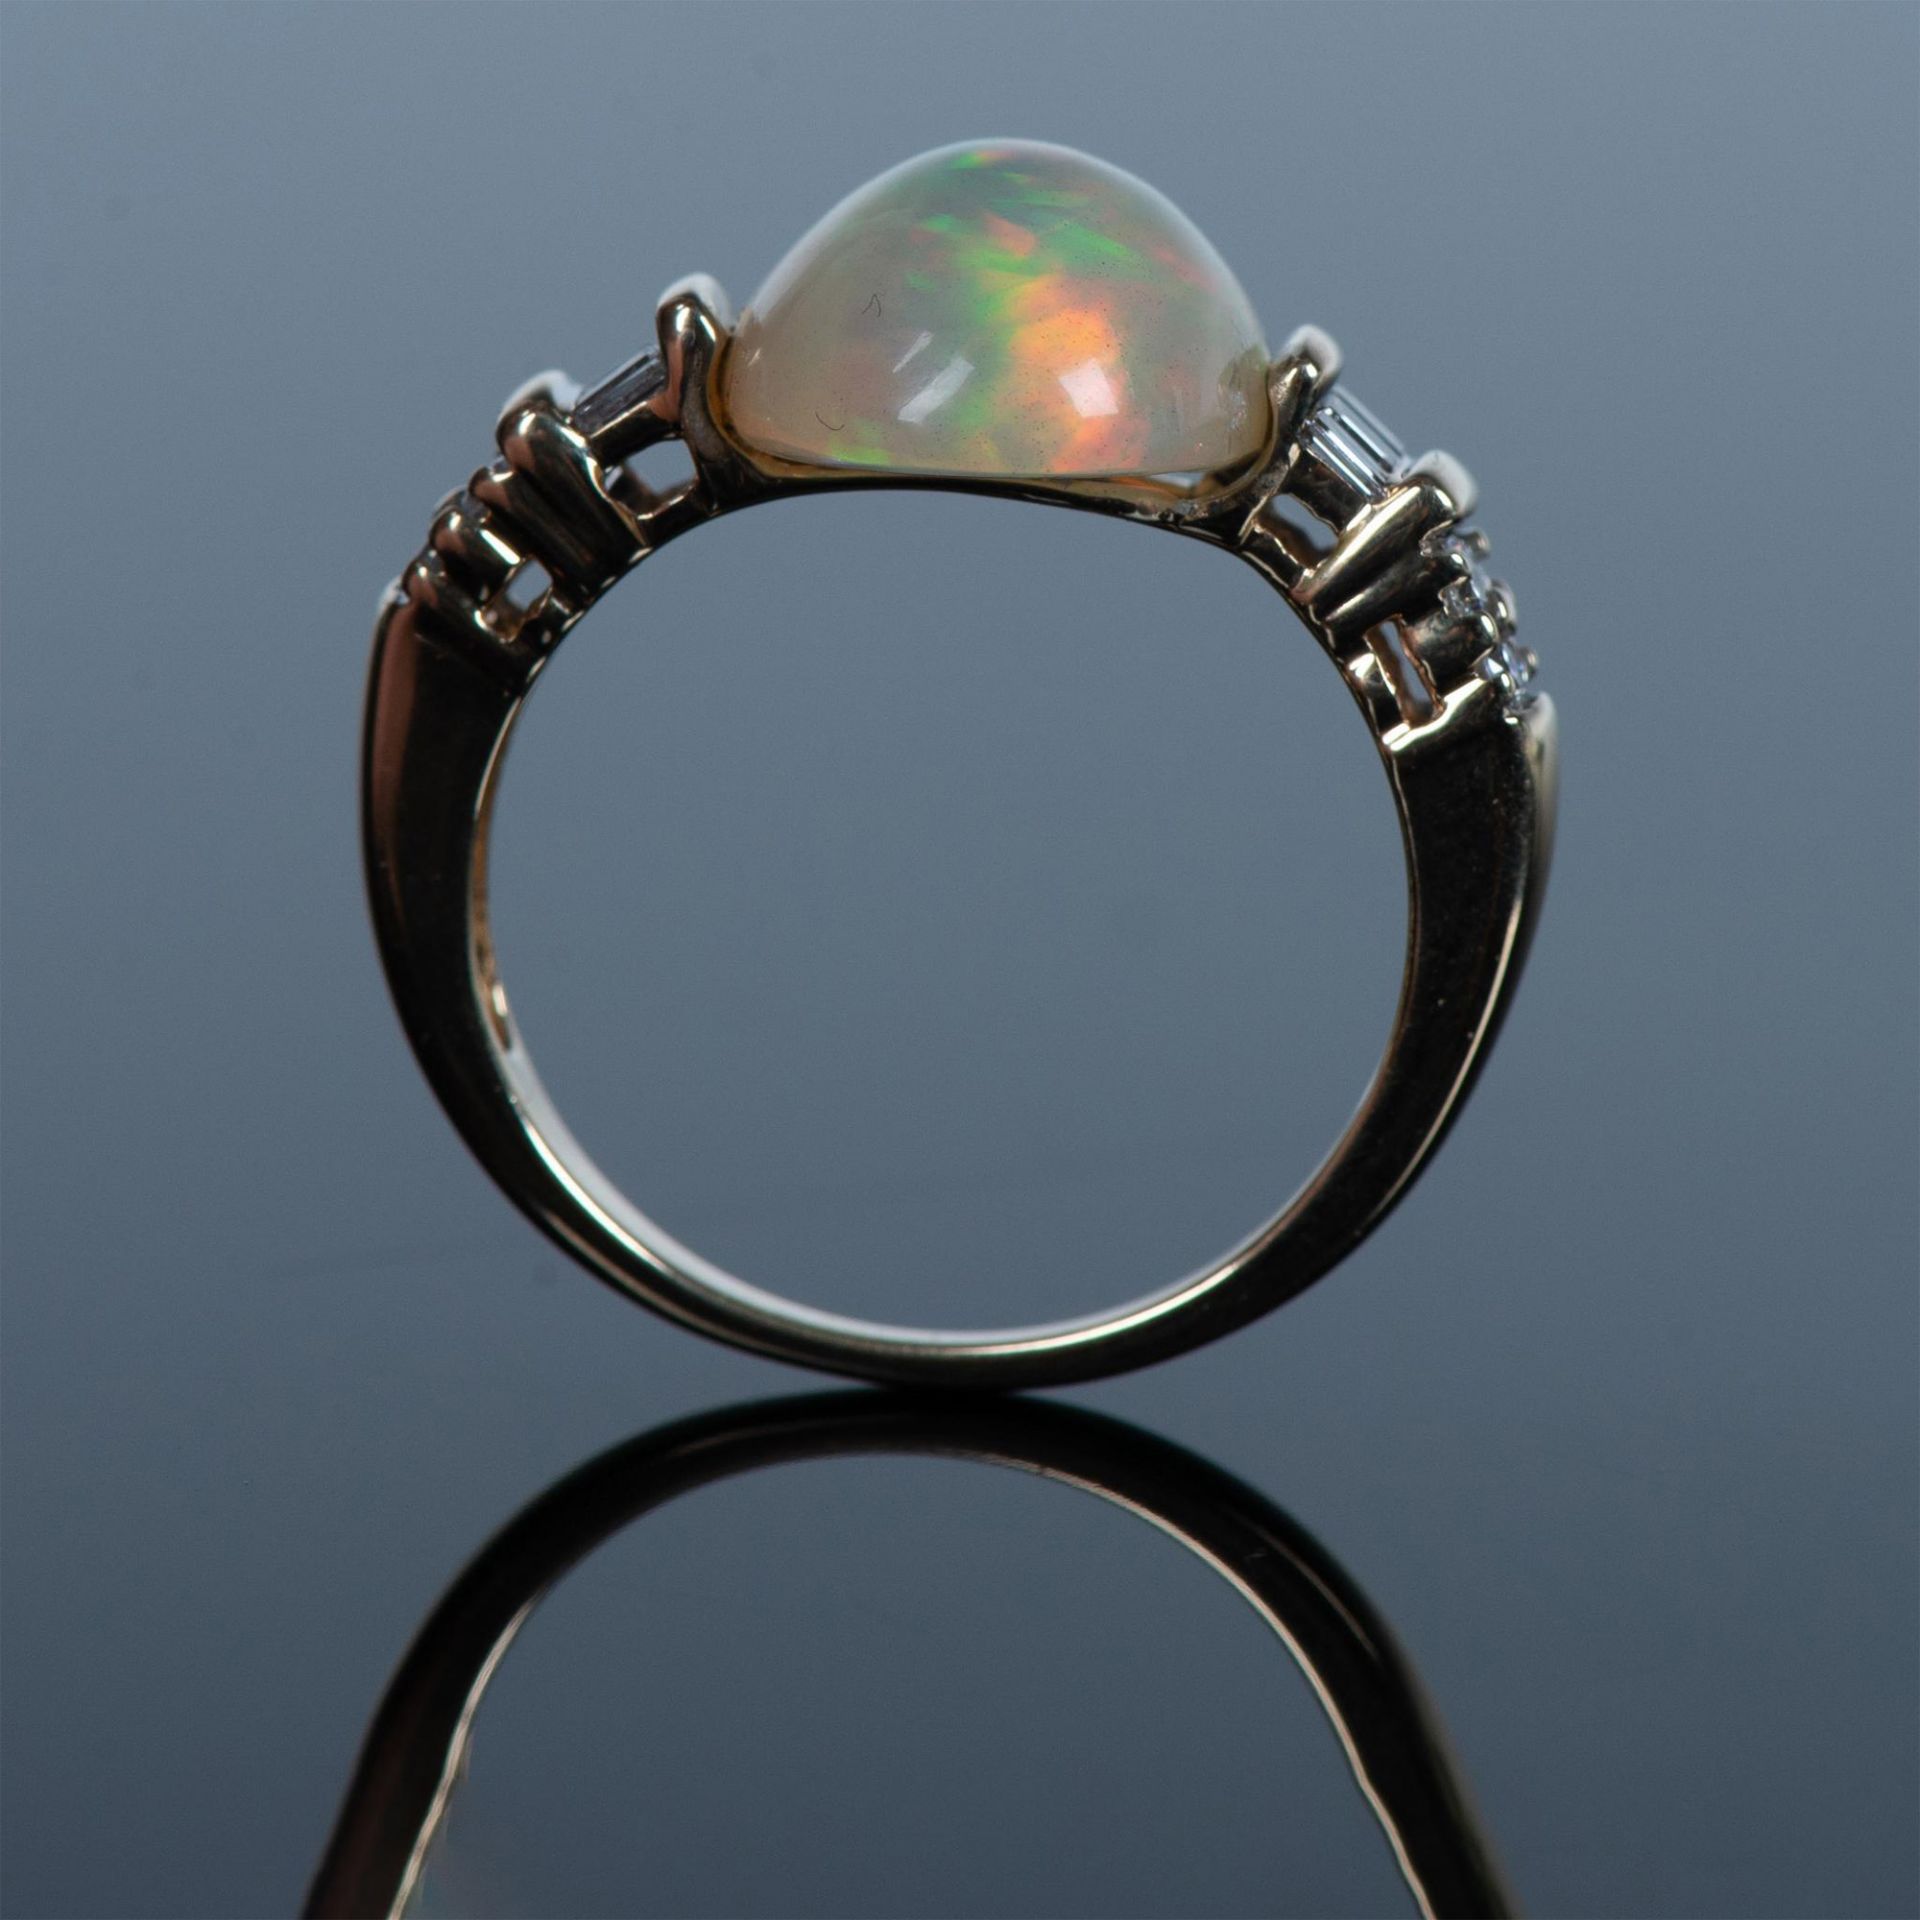 Gorgeous 14K Yellow Gold, Diamond, and Opal Ring - Image 10 of 12